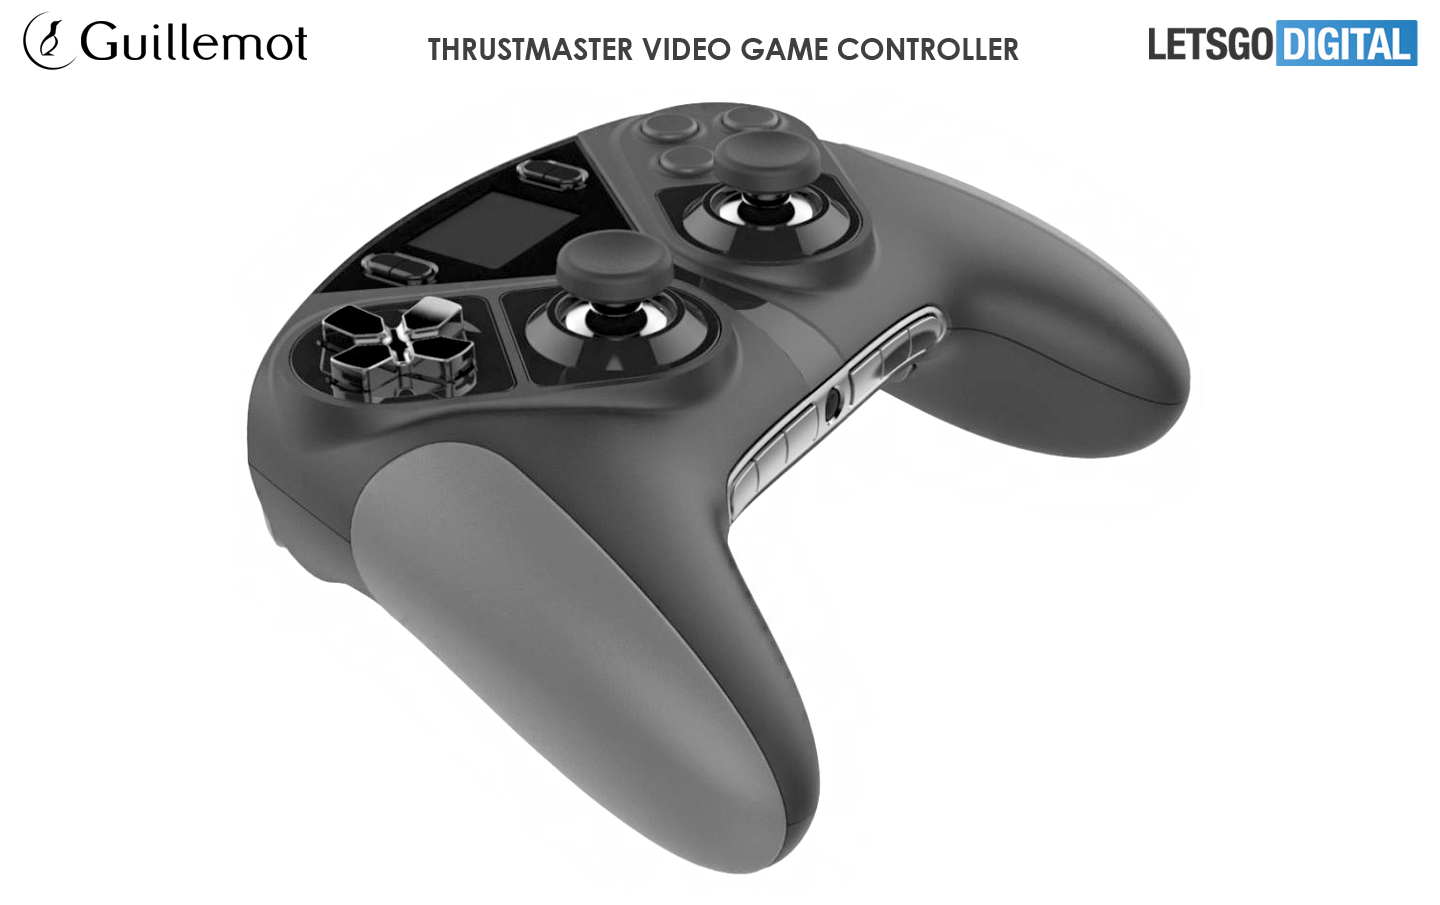 Sony PlayStation controller